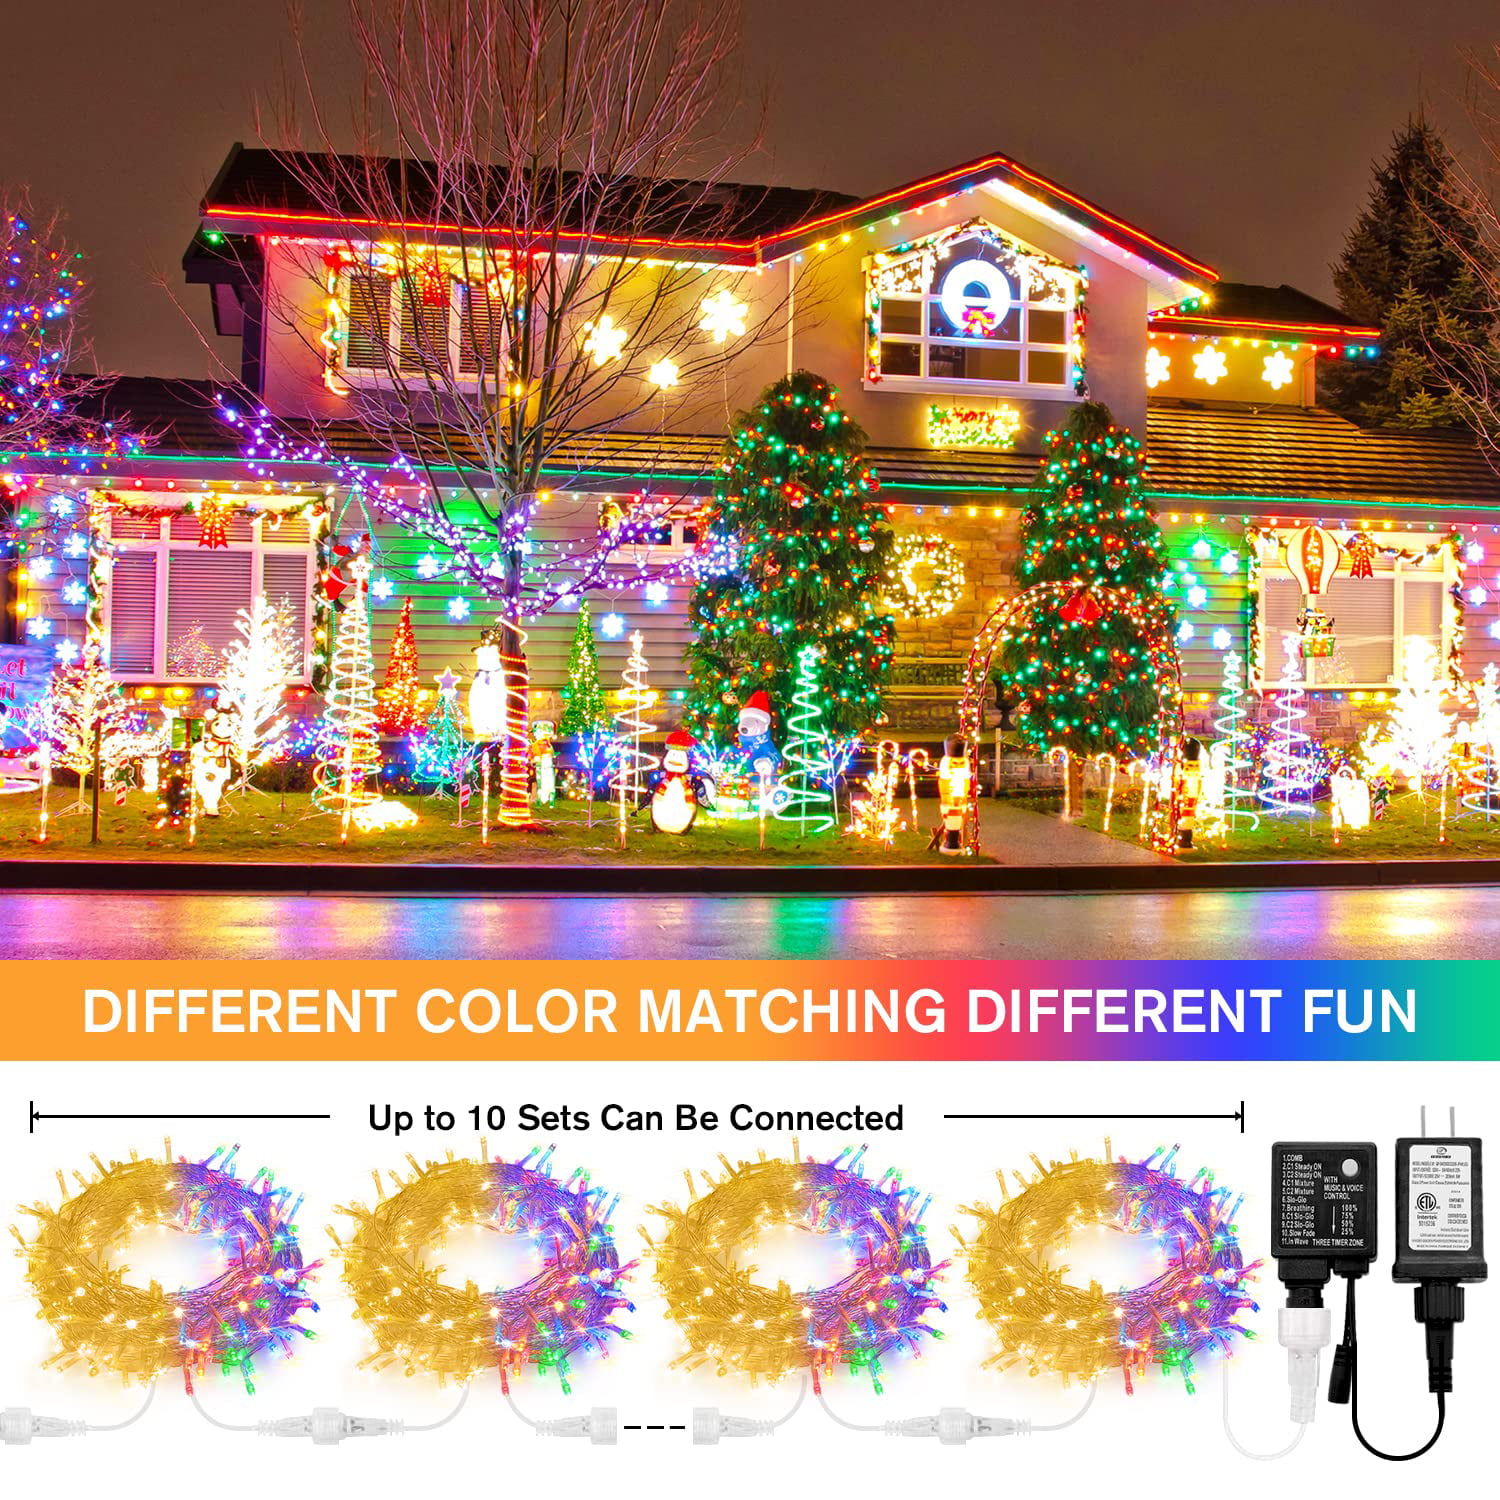 KAZOKU Christmas Light Outdoor 380 LED 33FT Waterproof Fairy String Lights  Green Wire Outdoor Christmas Lights Remote Control 11 Lighting Modes House